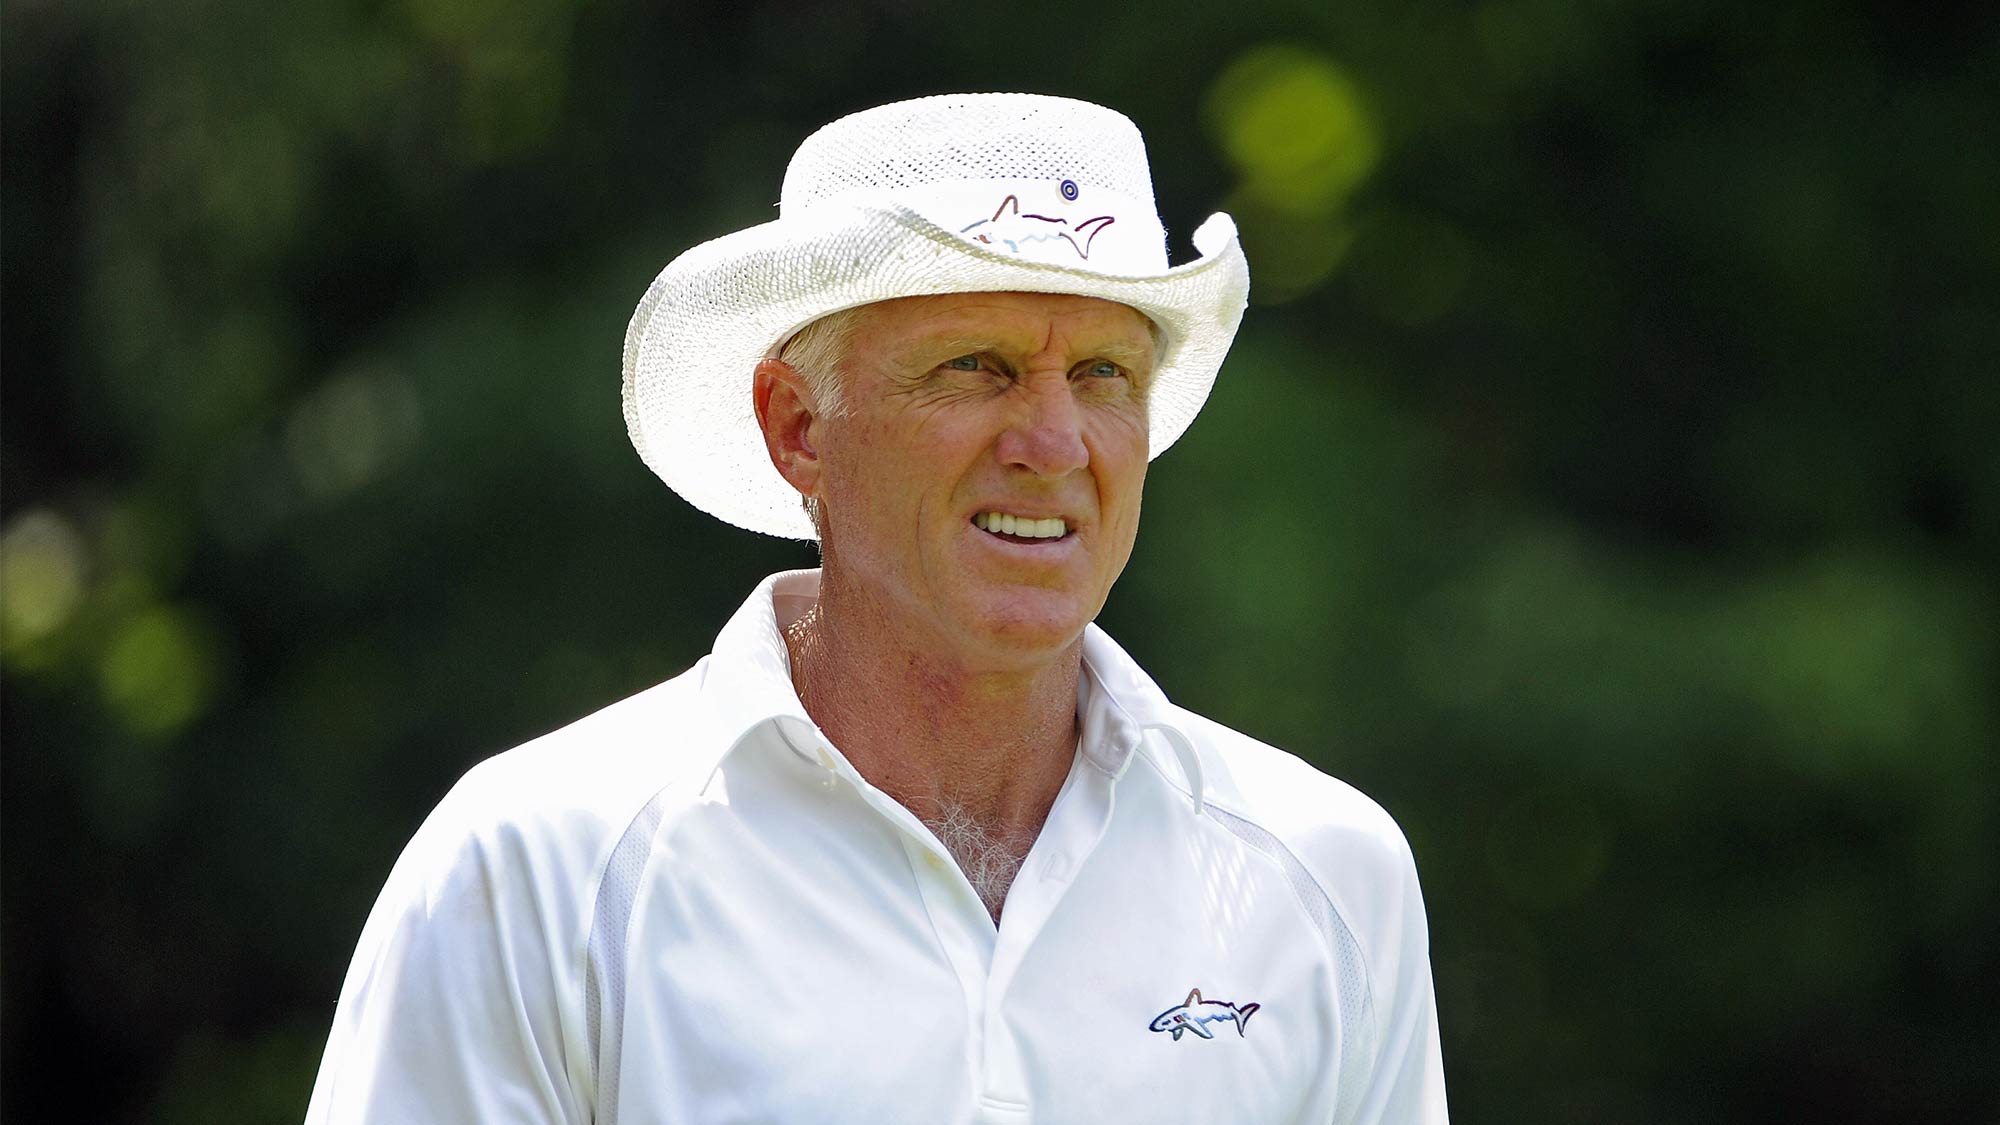 Greg Norman delivers warning during 'hideous' COVID-19 battle